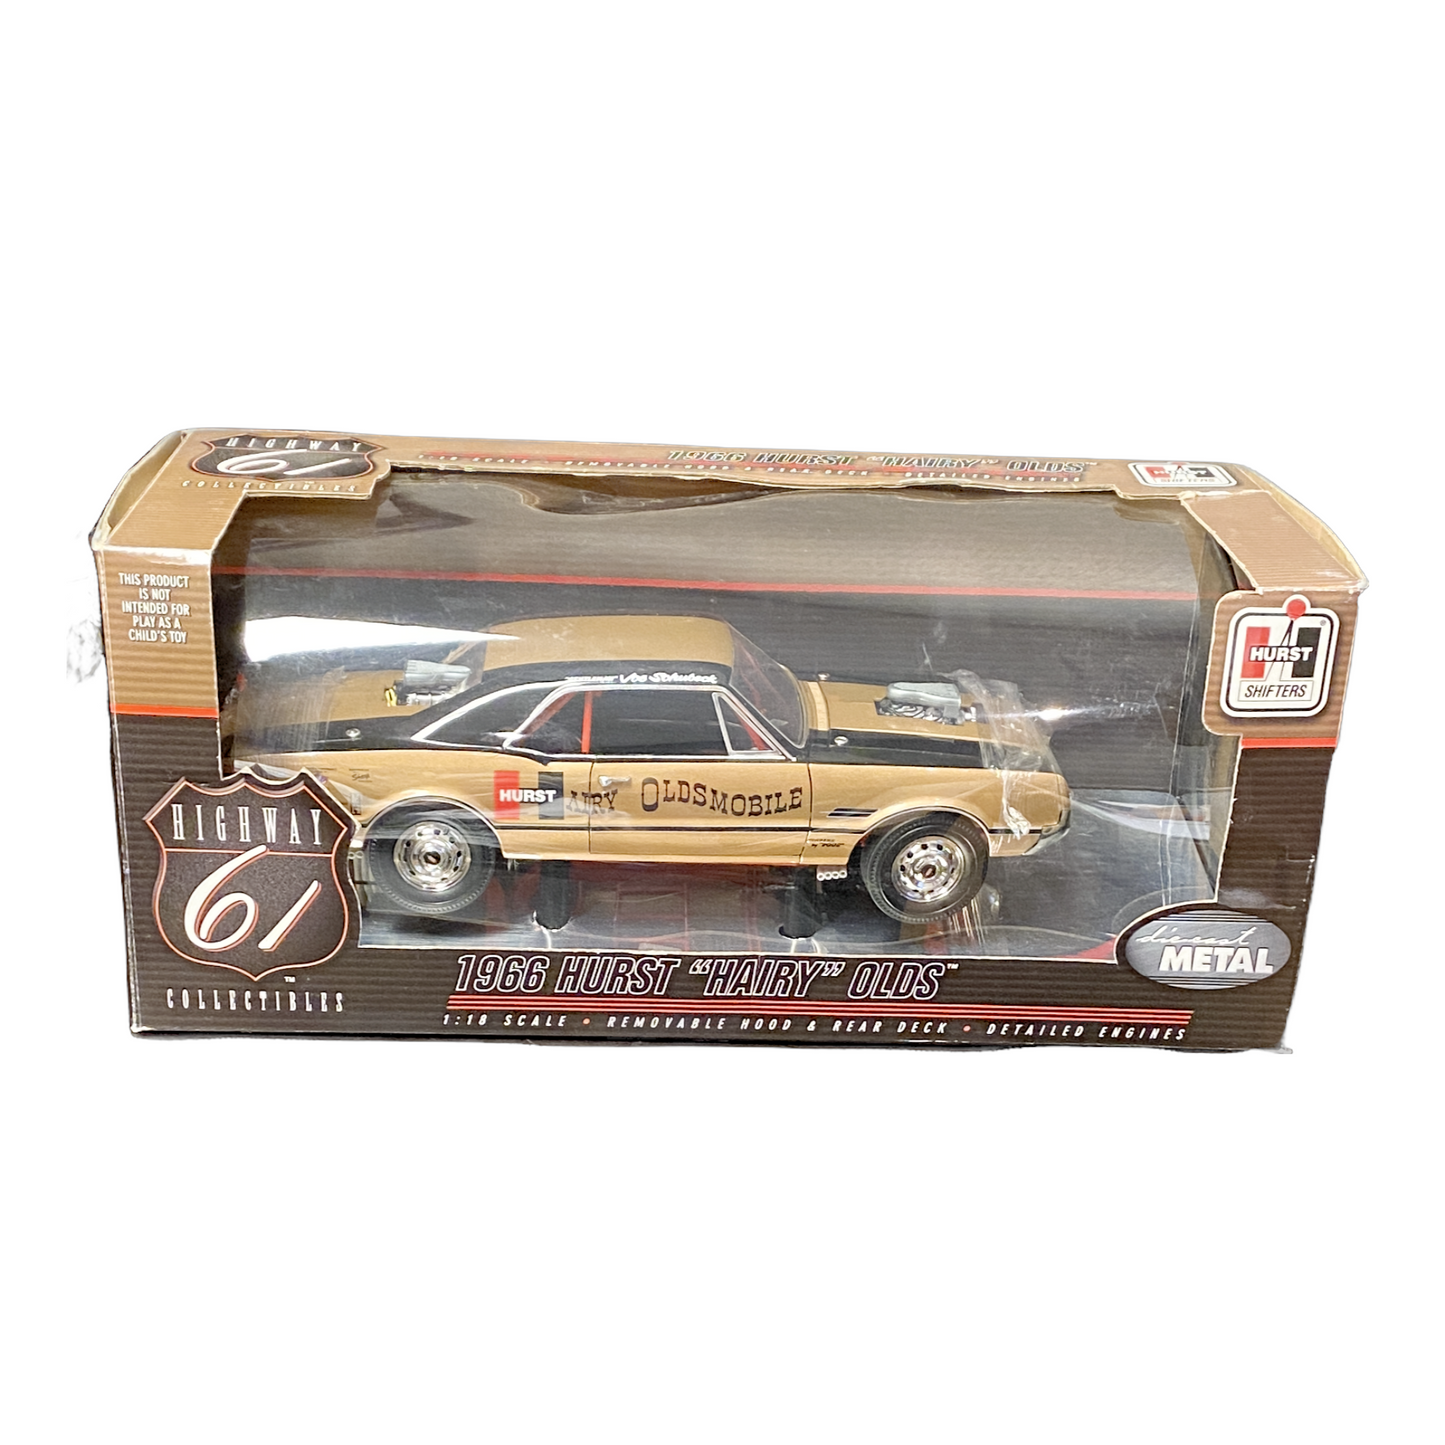 1/18 Scale 1966 Oldsmobile 442 Hurst Hairy Olds	Black/Copper/Race Graphics - Highway 61